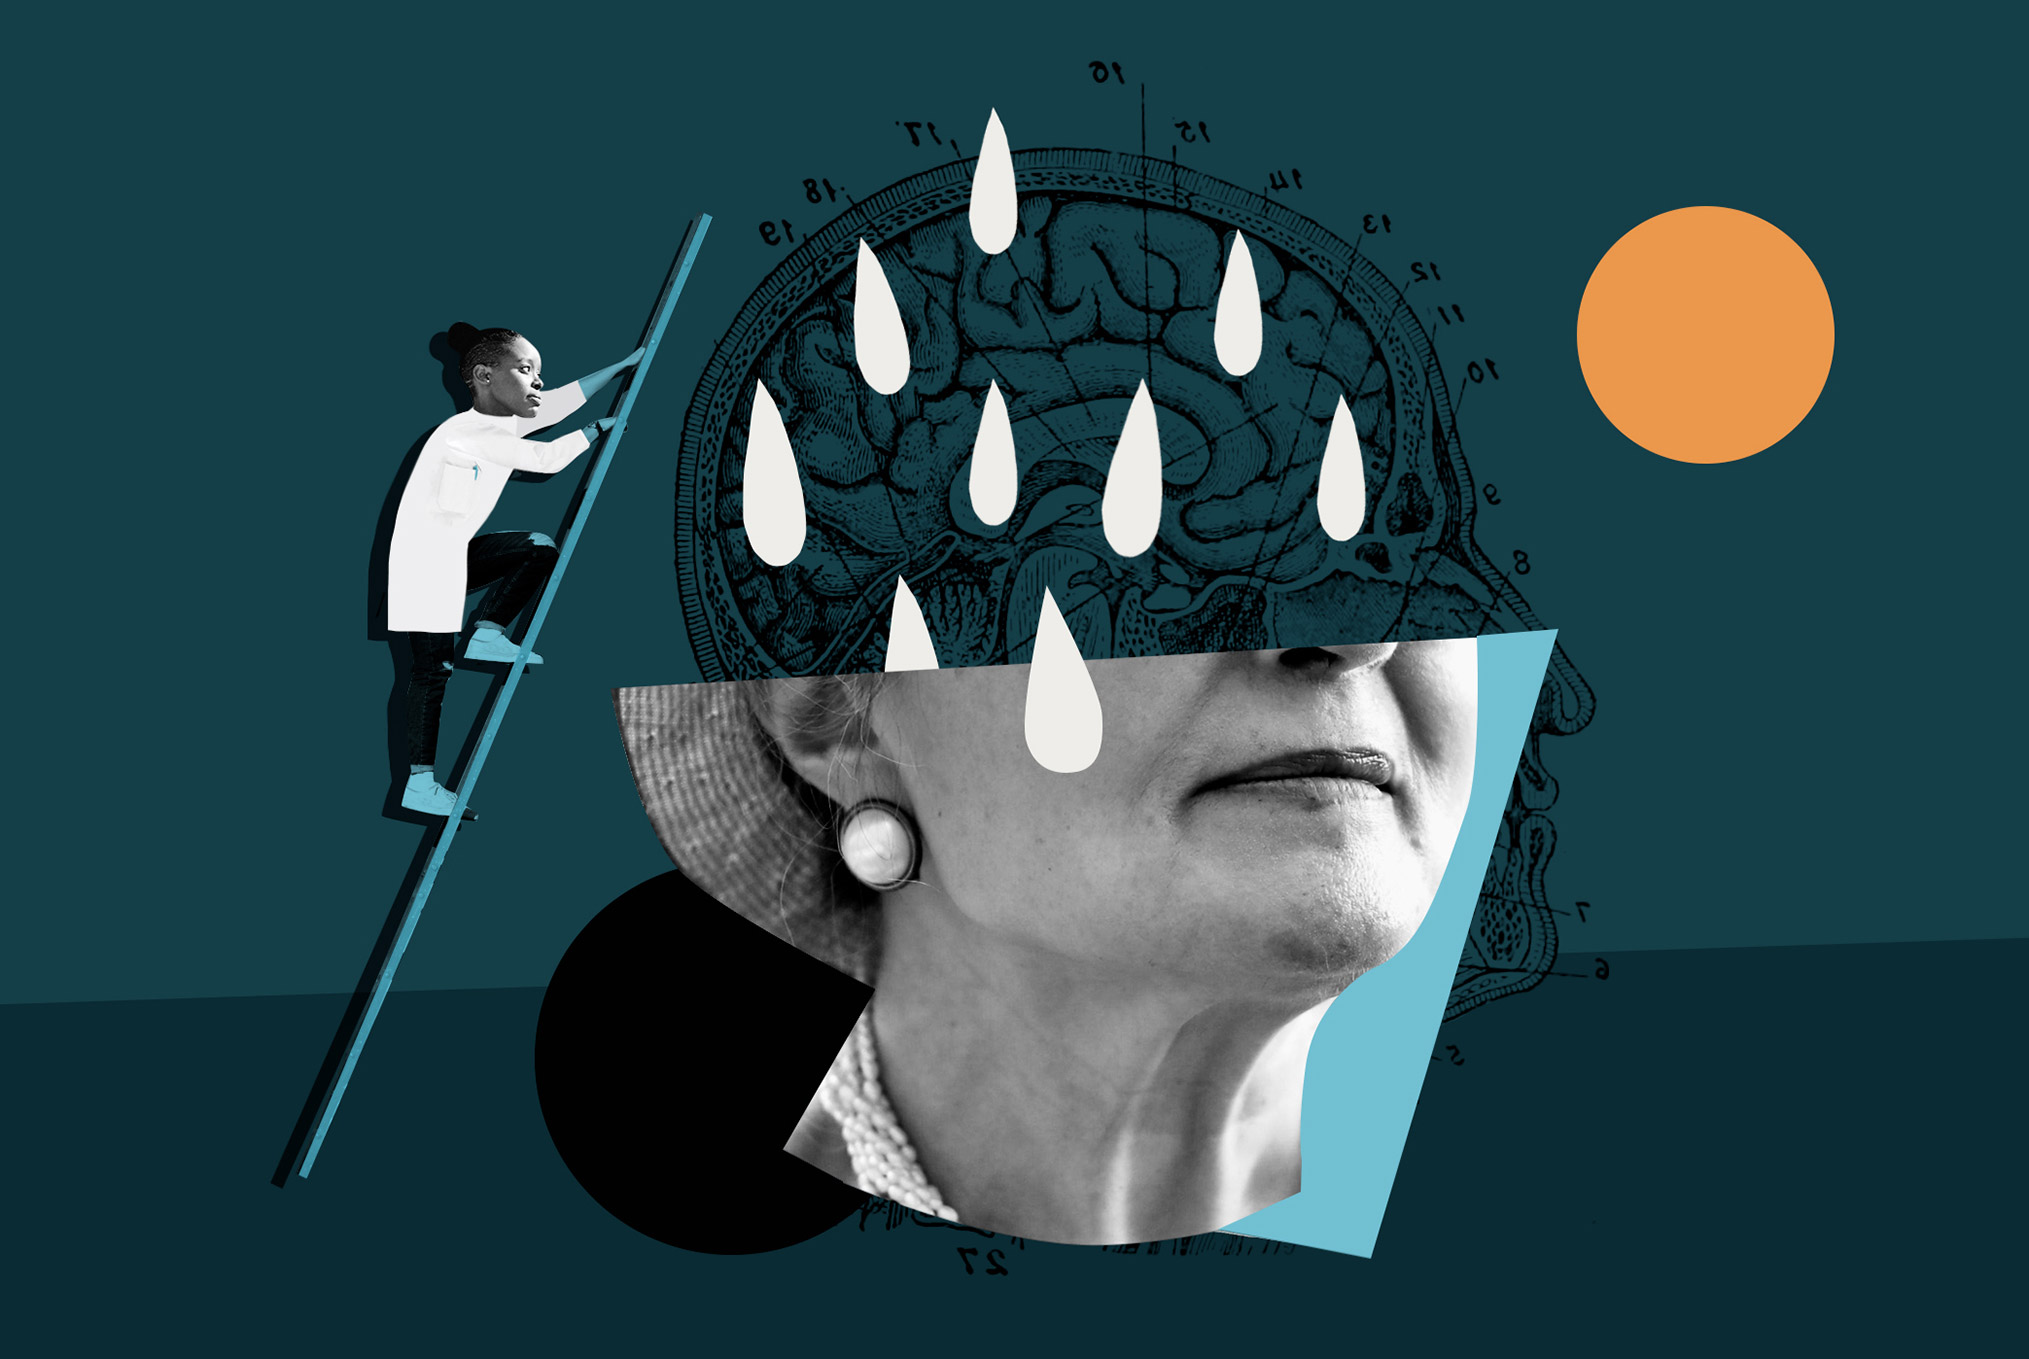 Conceptual illustration depicting a researcher examining the mind in darkness/depression